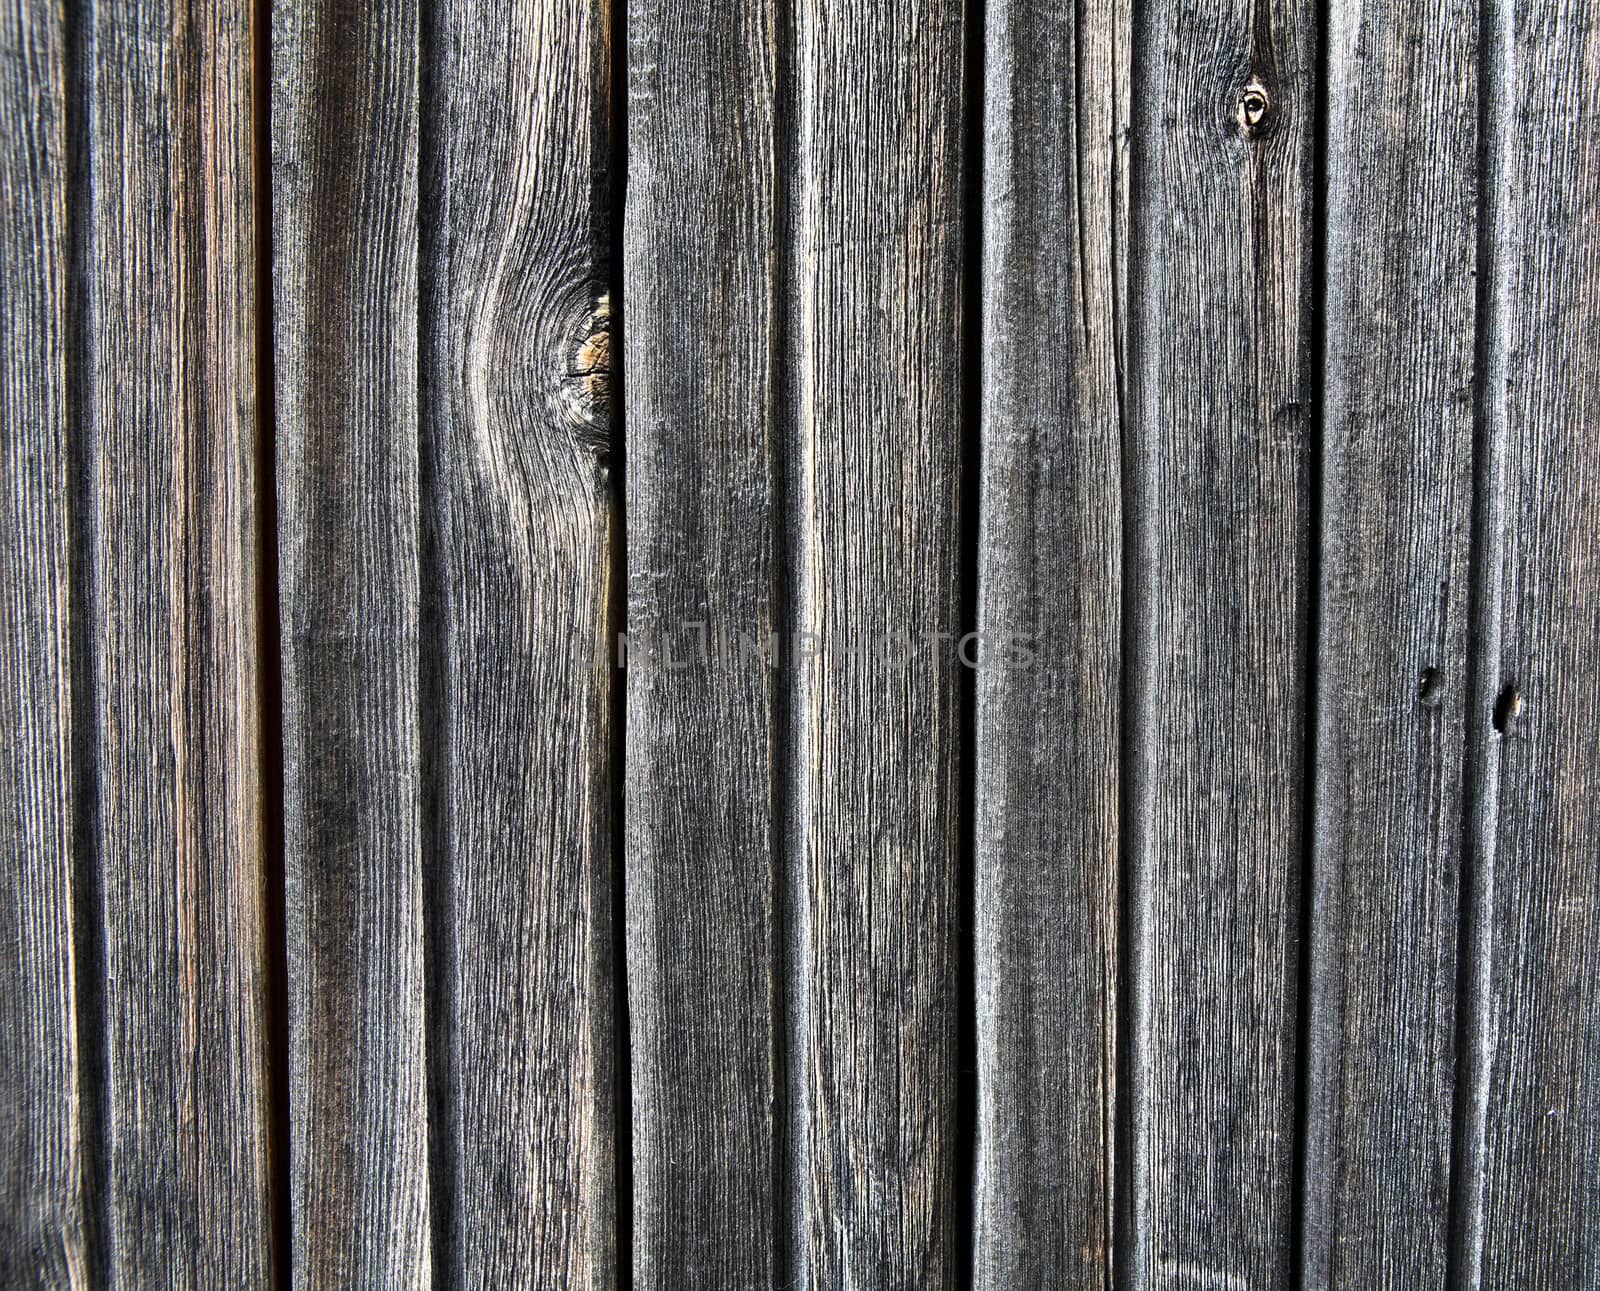 Wooden Planks Background by sabphoto